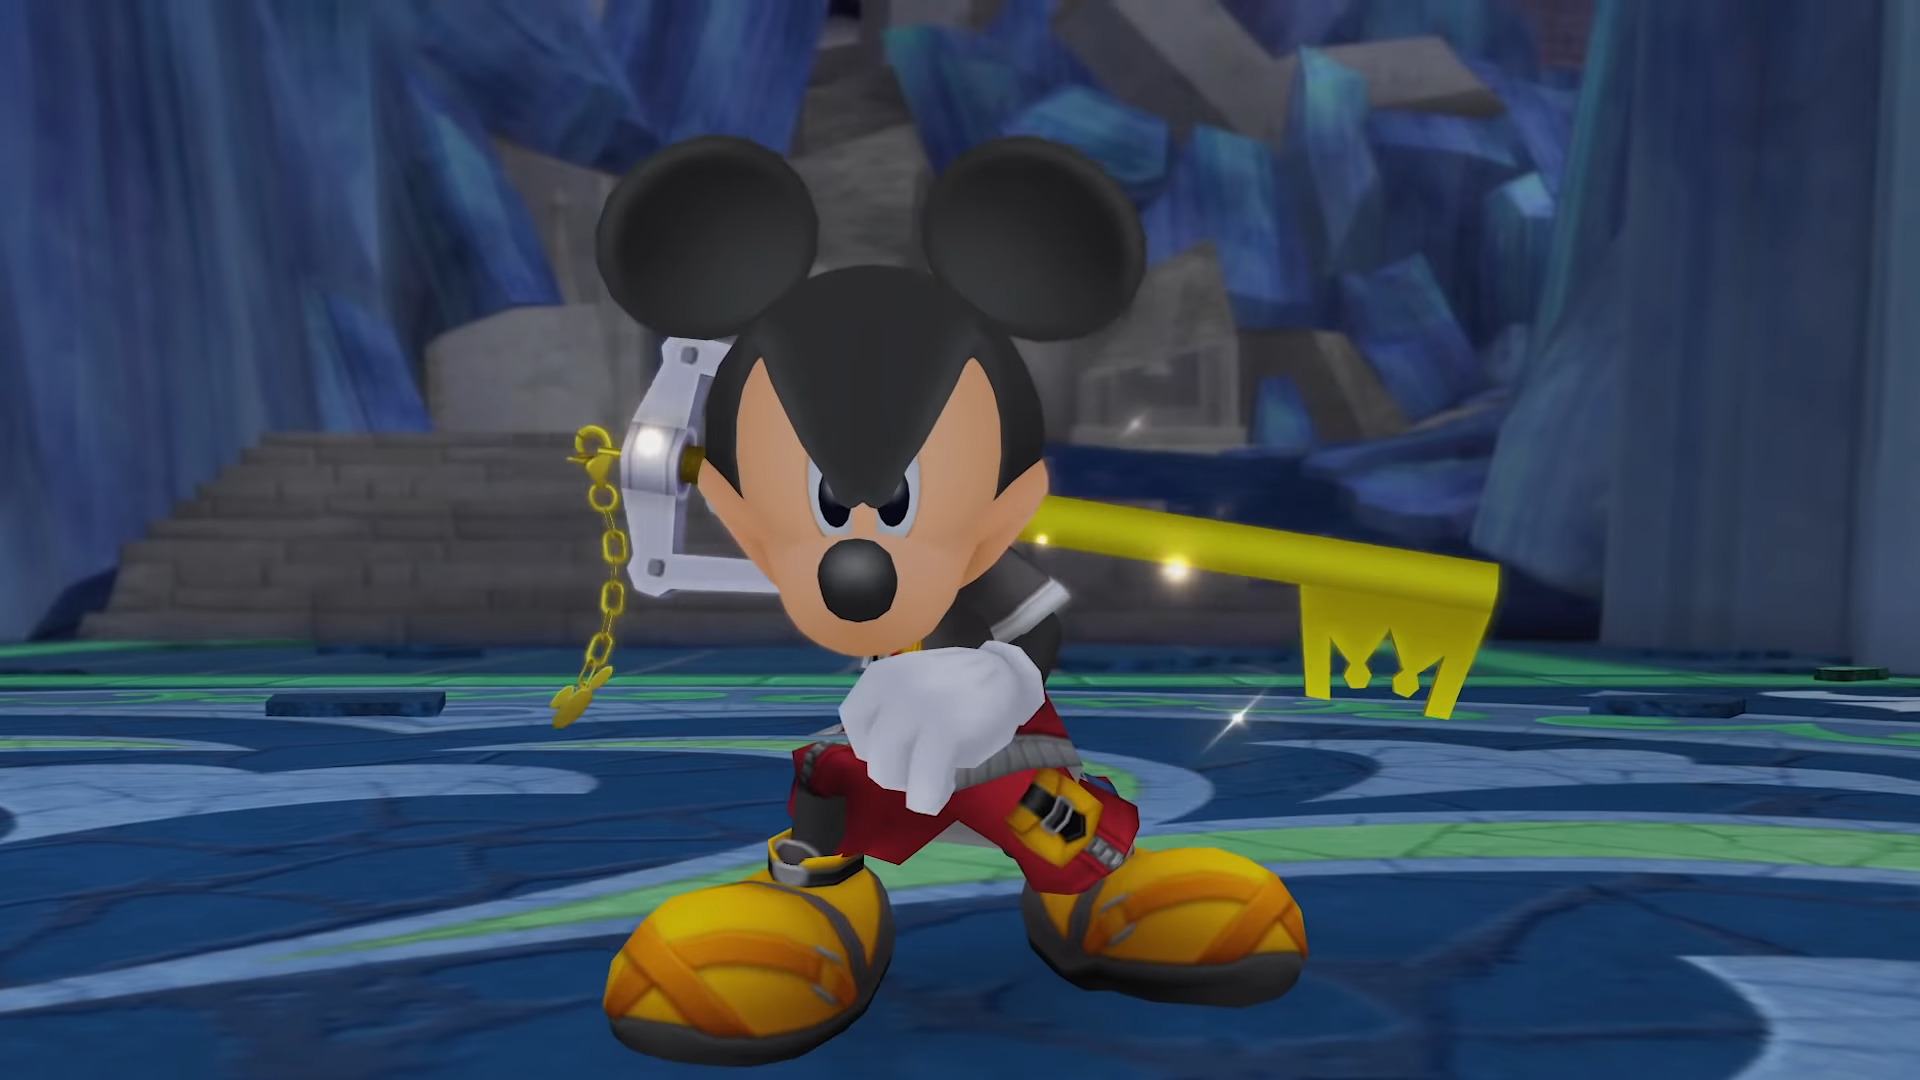 Mickey Mouse (Chris Diamantopoulos) rushes off to avenge the 'death' of Goofy (Bill Farmer) in Kingdom Hearts II (2005), Square Enix